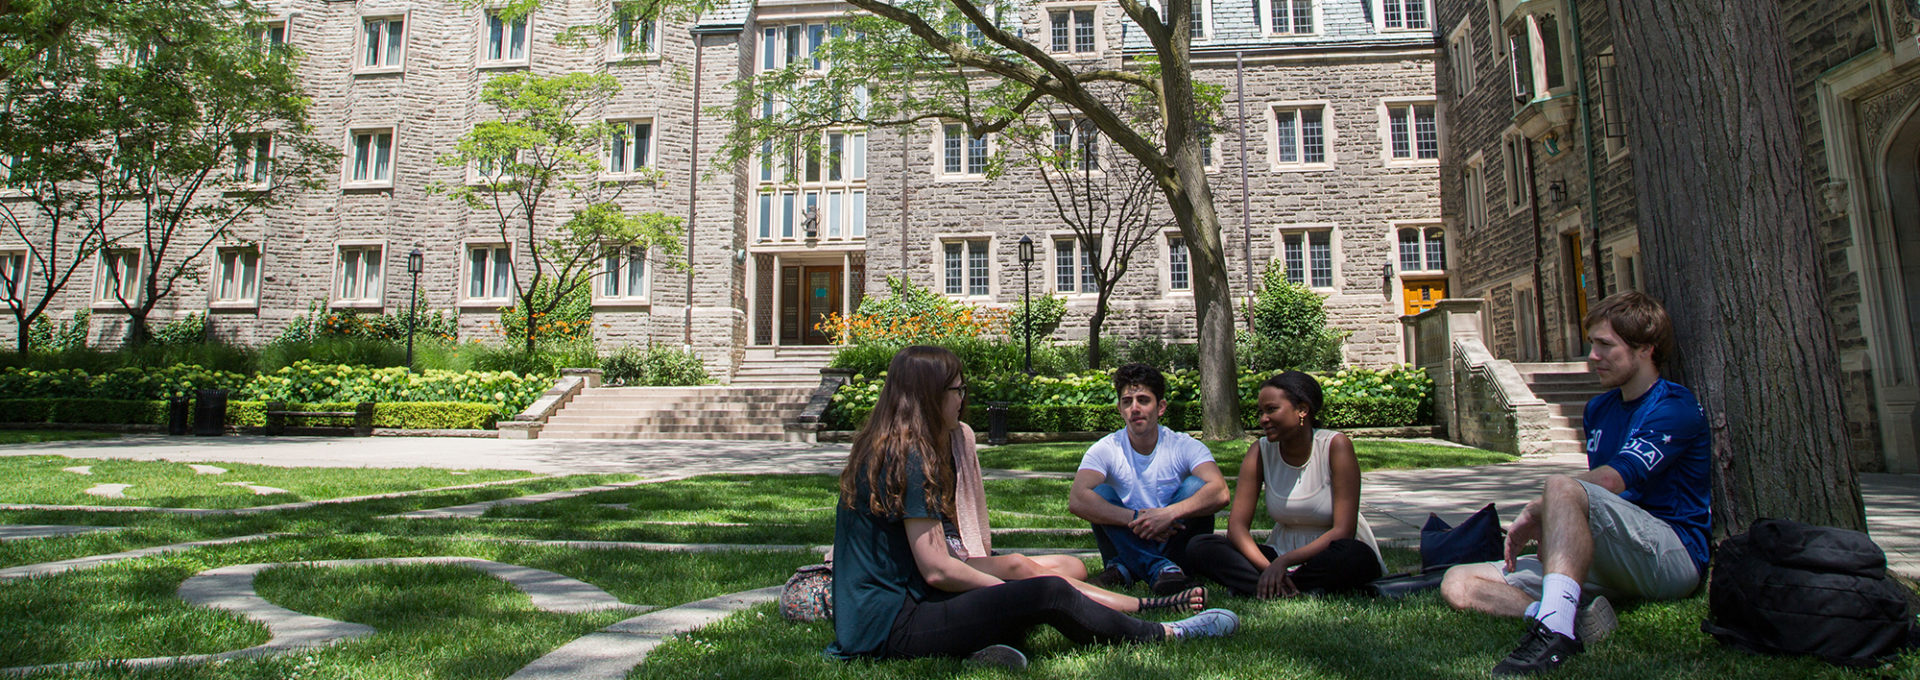 Students sitting under one of the honey locus trees in the Quad